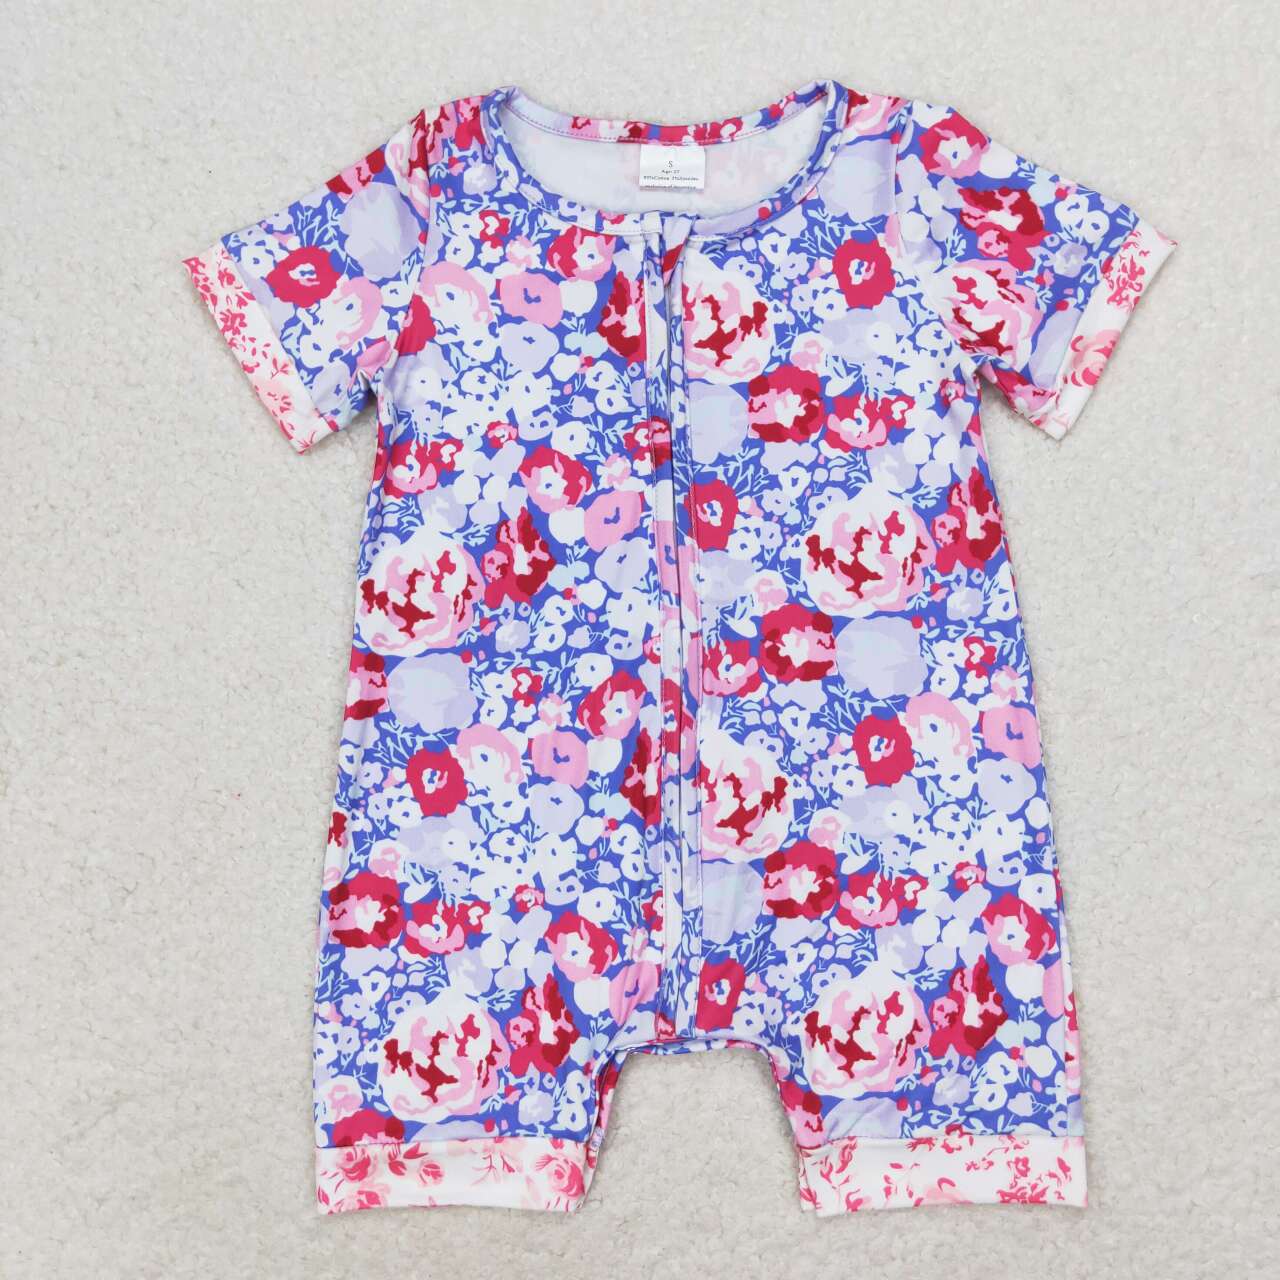 RTS no moq SR1767 Kids girls summer clothes short sleeve with romper